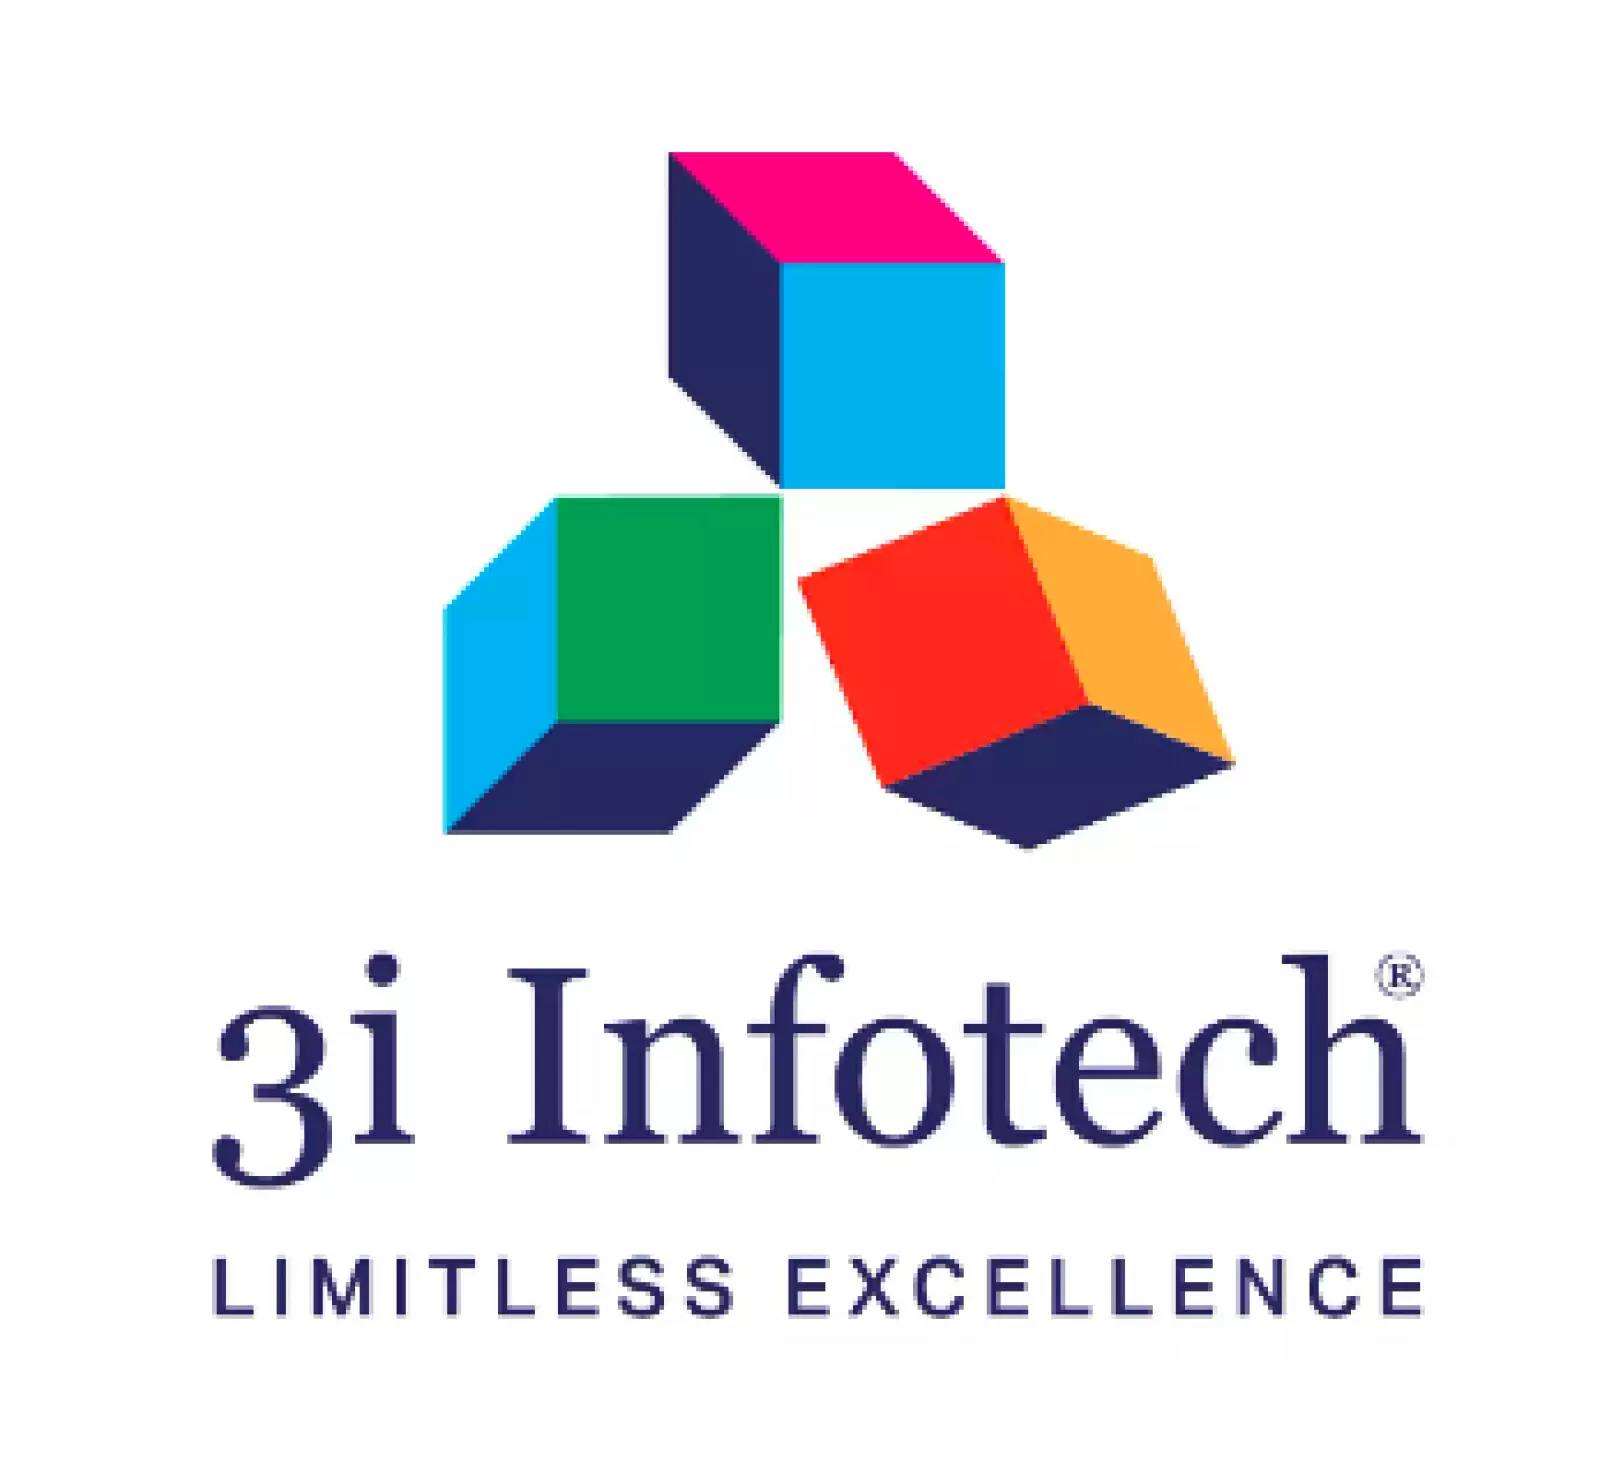 3i Infotech Recognized as an 'Aspirant' in Next-Generation Quality Engineering by Everest Group